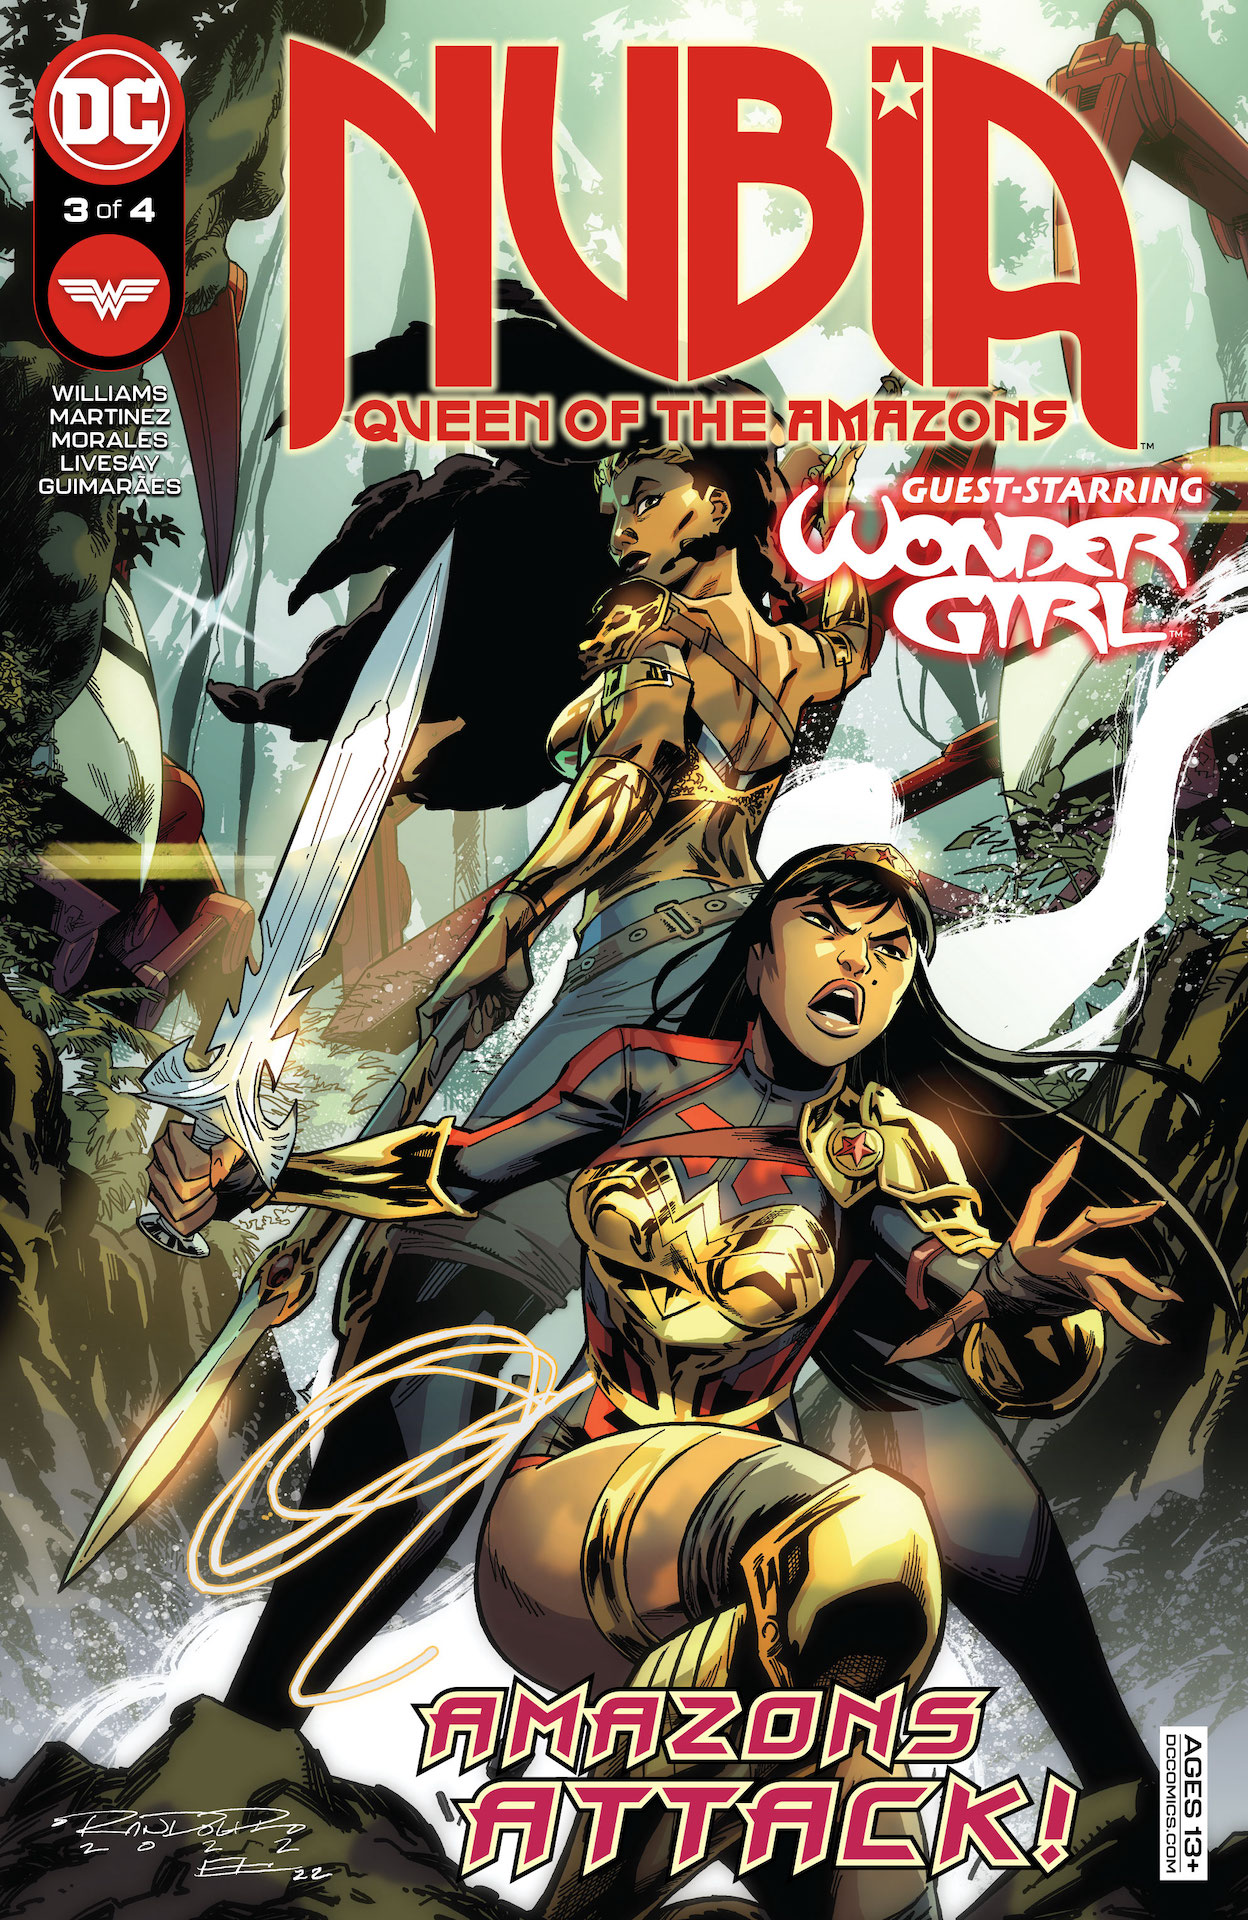 DC Preview: Nubia: Queen of the Amazons #3